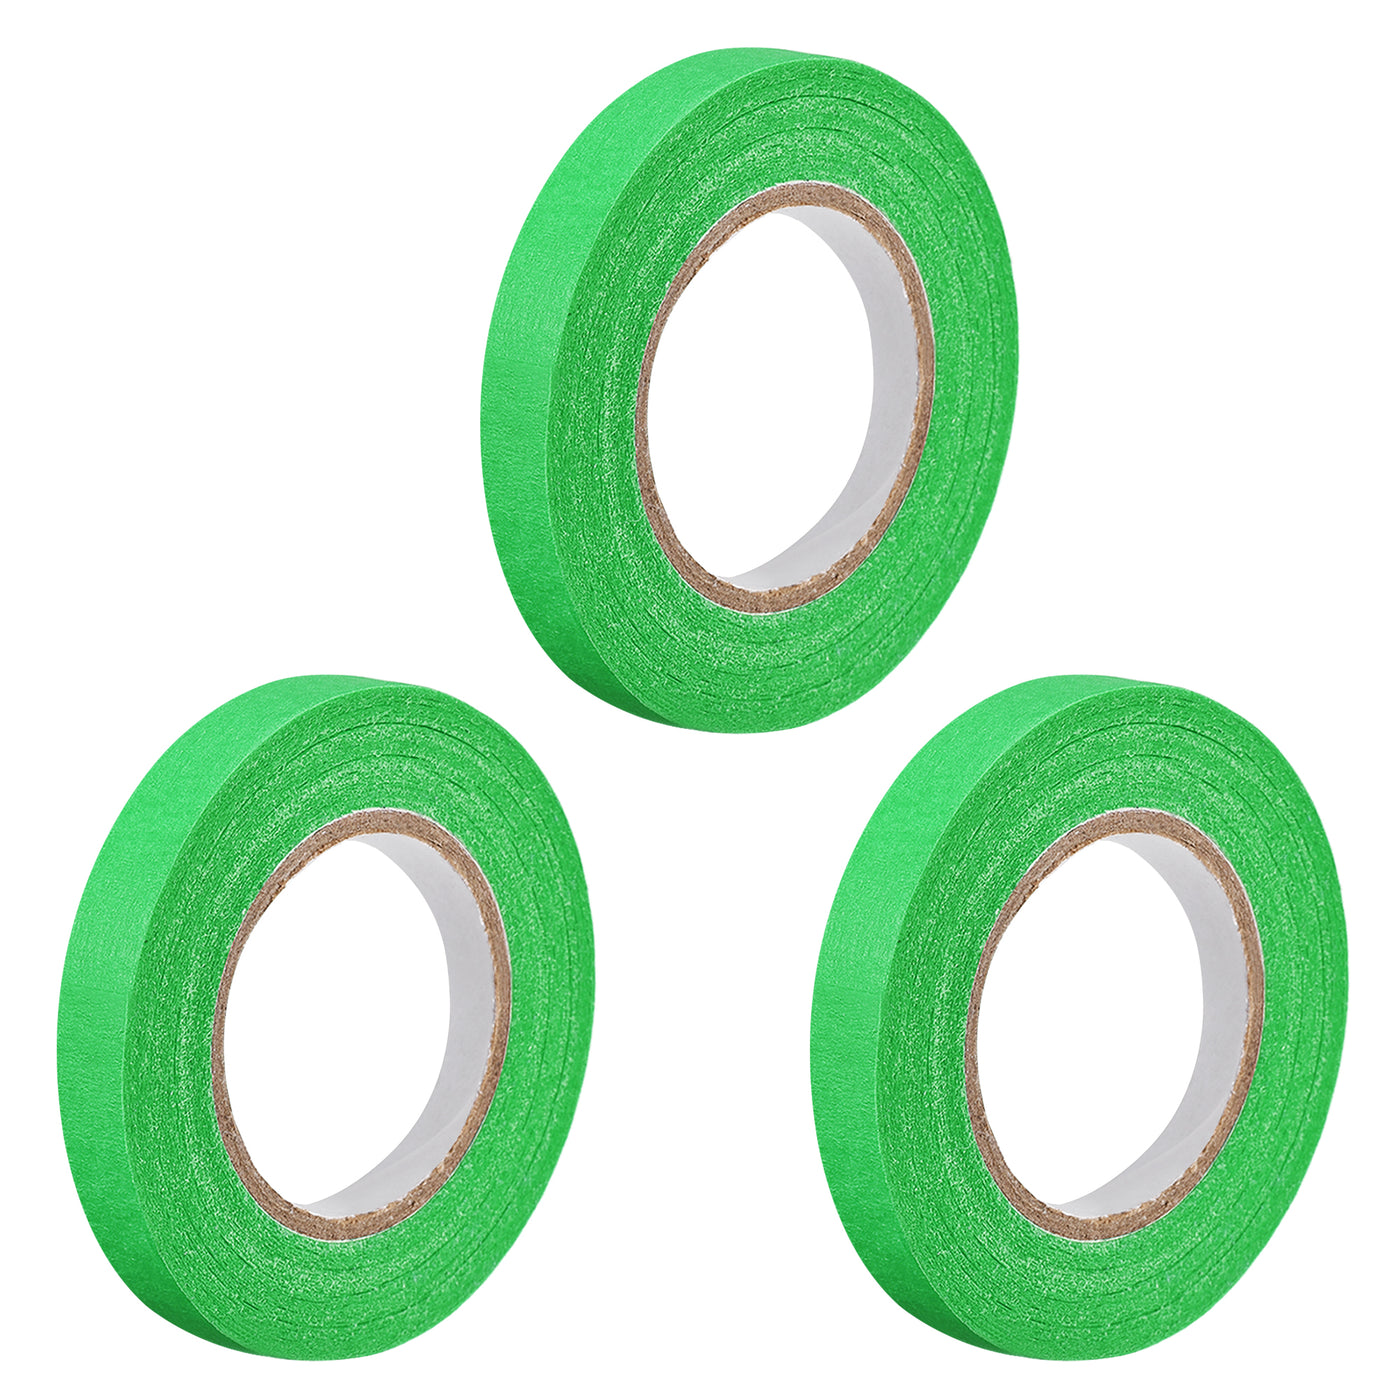 uxcell Uxcell 3Pcs 10mm 0.4 inch Wide 20m 21 Yards Masking Tape Painters Tape Rolls Dark Green